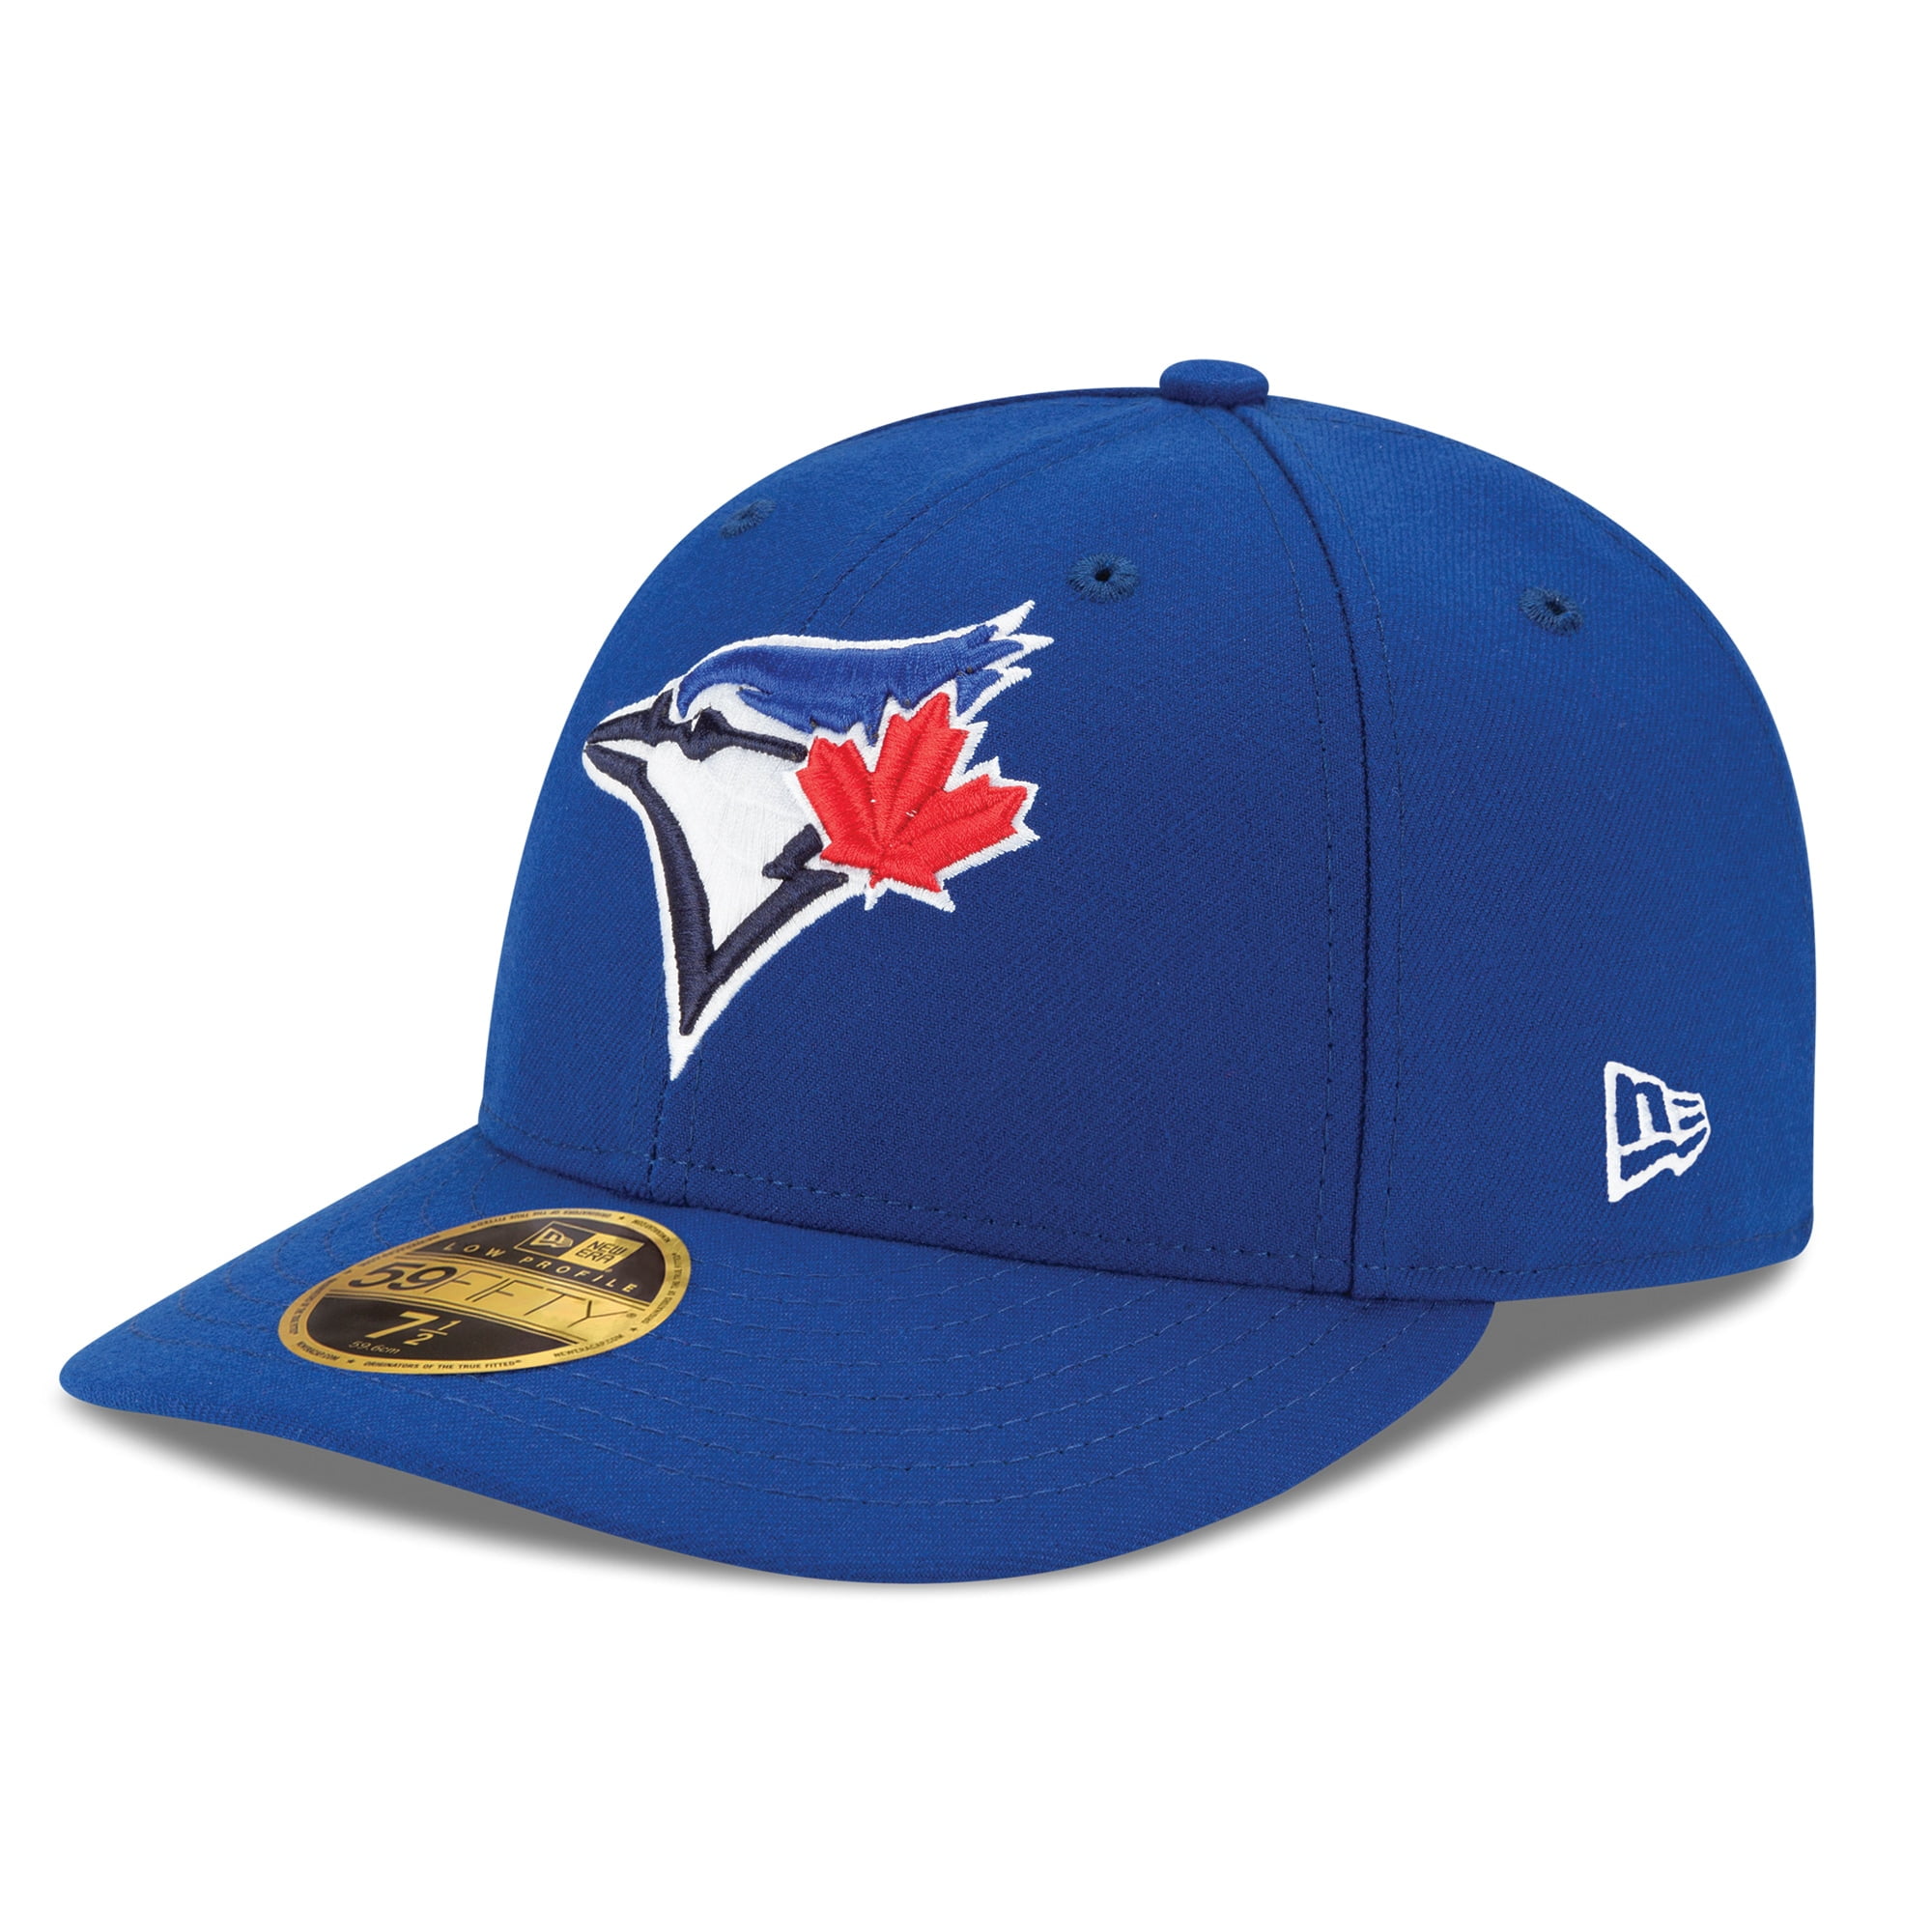 Men's New Era Royal Toronto Blue Jays 59FIFTY Fitted Hat